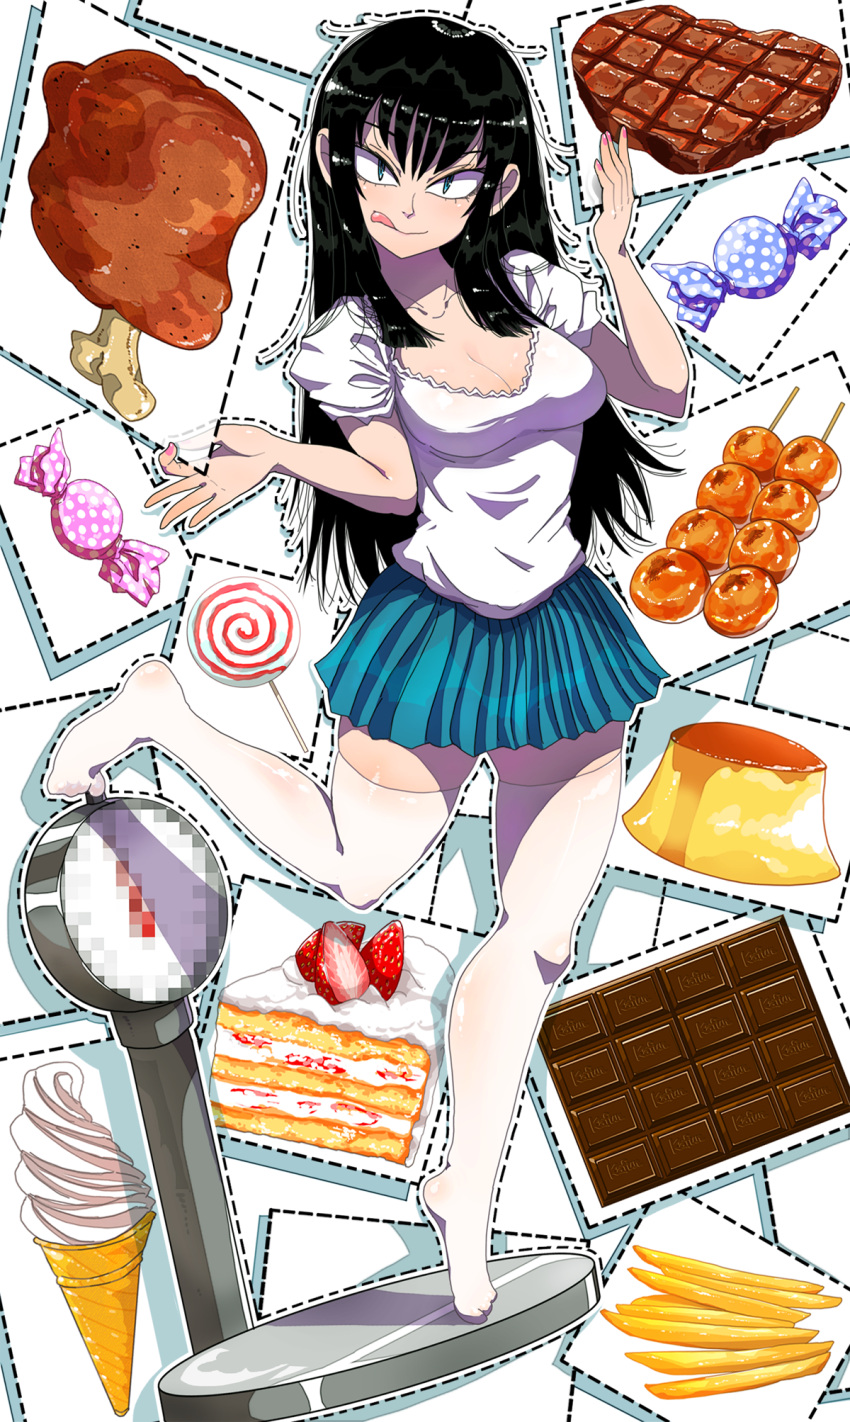 1girl :q bangs black_hair blouse blue_eyes blue_skirt boned_meat breasts cake candy censored chicken_leg chocolate chocolate_bar cleavage dango dotted_line food french_fries full_body highres ice_cream ice_cream_cone kafun lollipop long_hair looking_at_viewer meat medium_breasts miniskirt mitarashi_dango mosaic_censoring nail_polish no_shoes ok_sign original pink_nails pleated_skirt pudding sanpaku short_sleeves skirt slice_of_cake smile soft_serve solo standing standing_on_one_leg steak strawberry_shortcake swirl_lollipop thigh-highs tiptoes tongue tongue_out tsurime w_arms wagashi weighing_scale white_blouse white_legwear wrapped_candy zettai_ryouiki